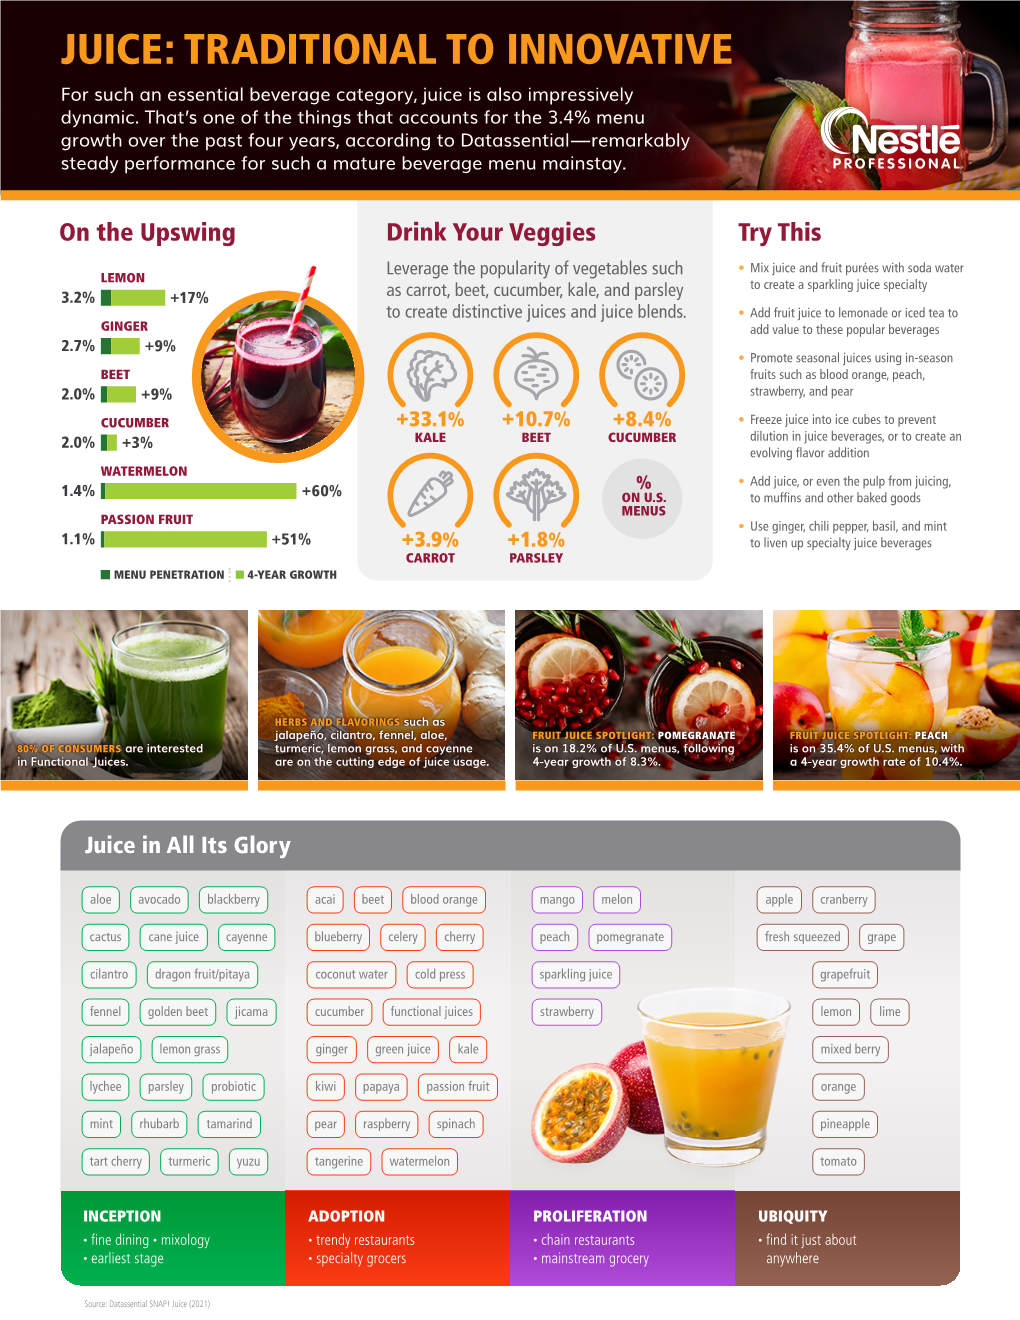 JUICE: TRADITIONAL to INNOVATIVE for Such an Essential Beverage Category, Juice Is Also Impressively Dynamic